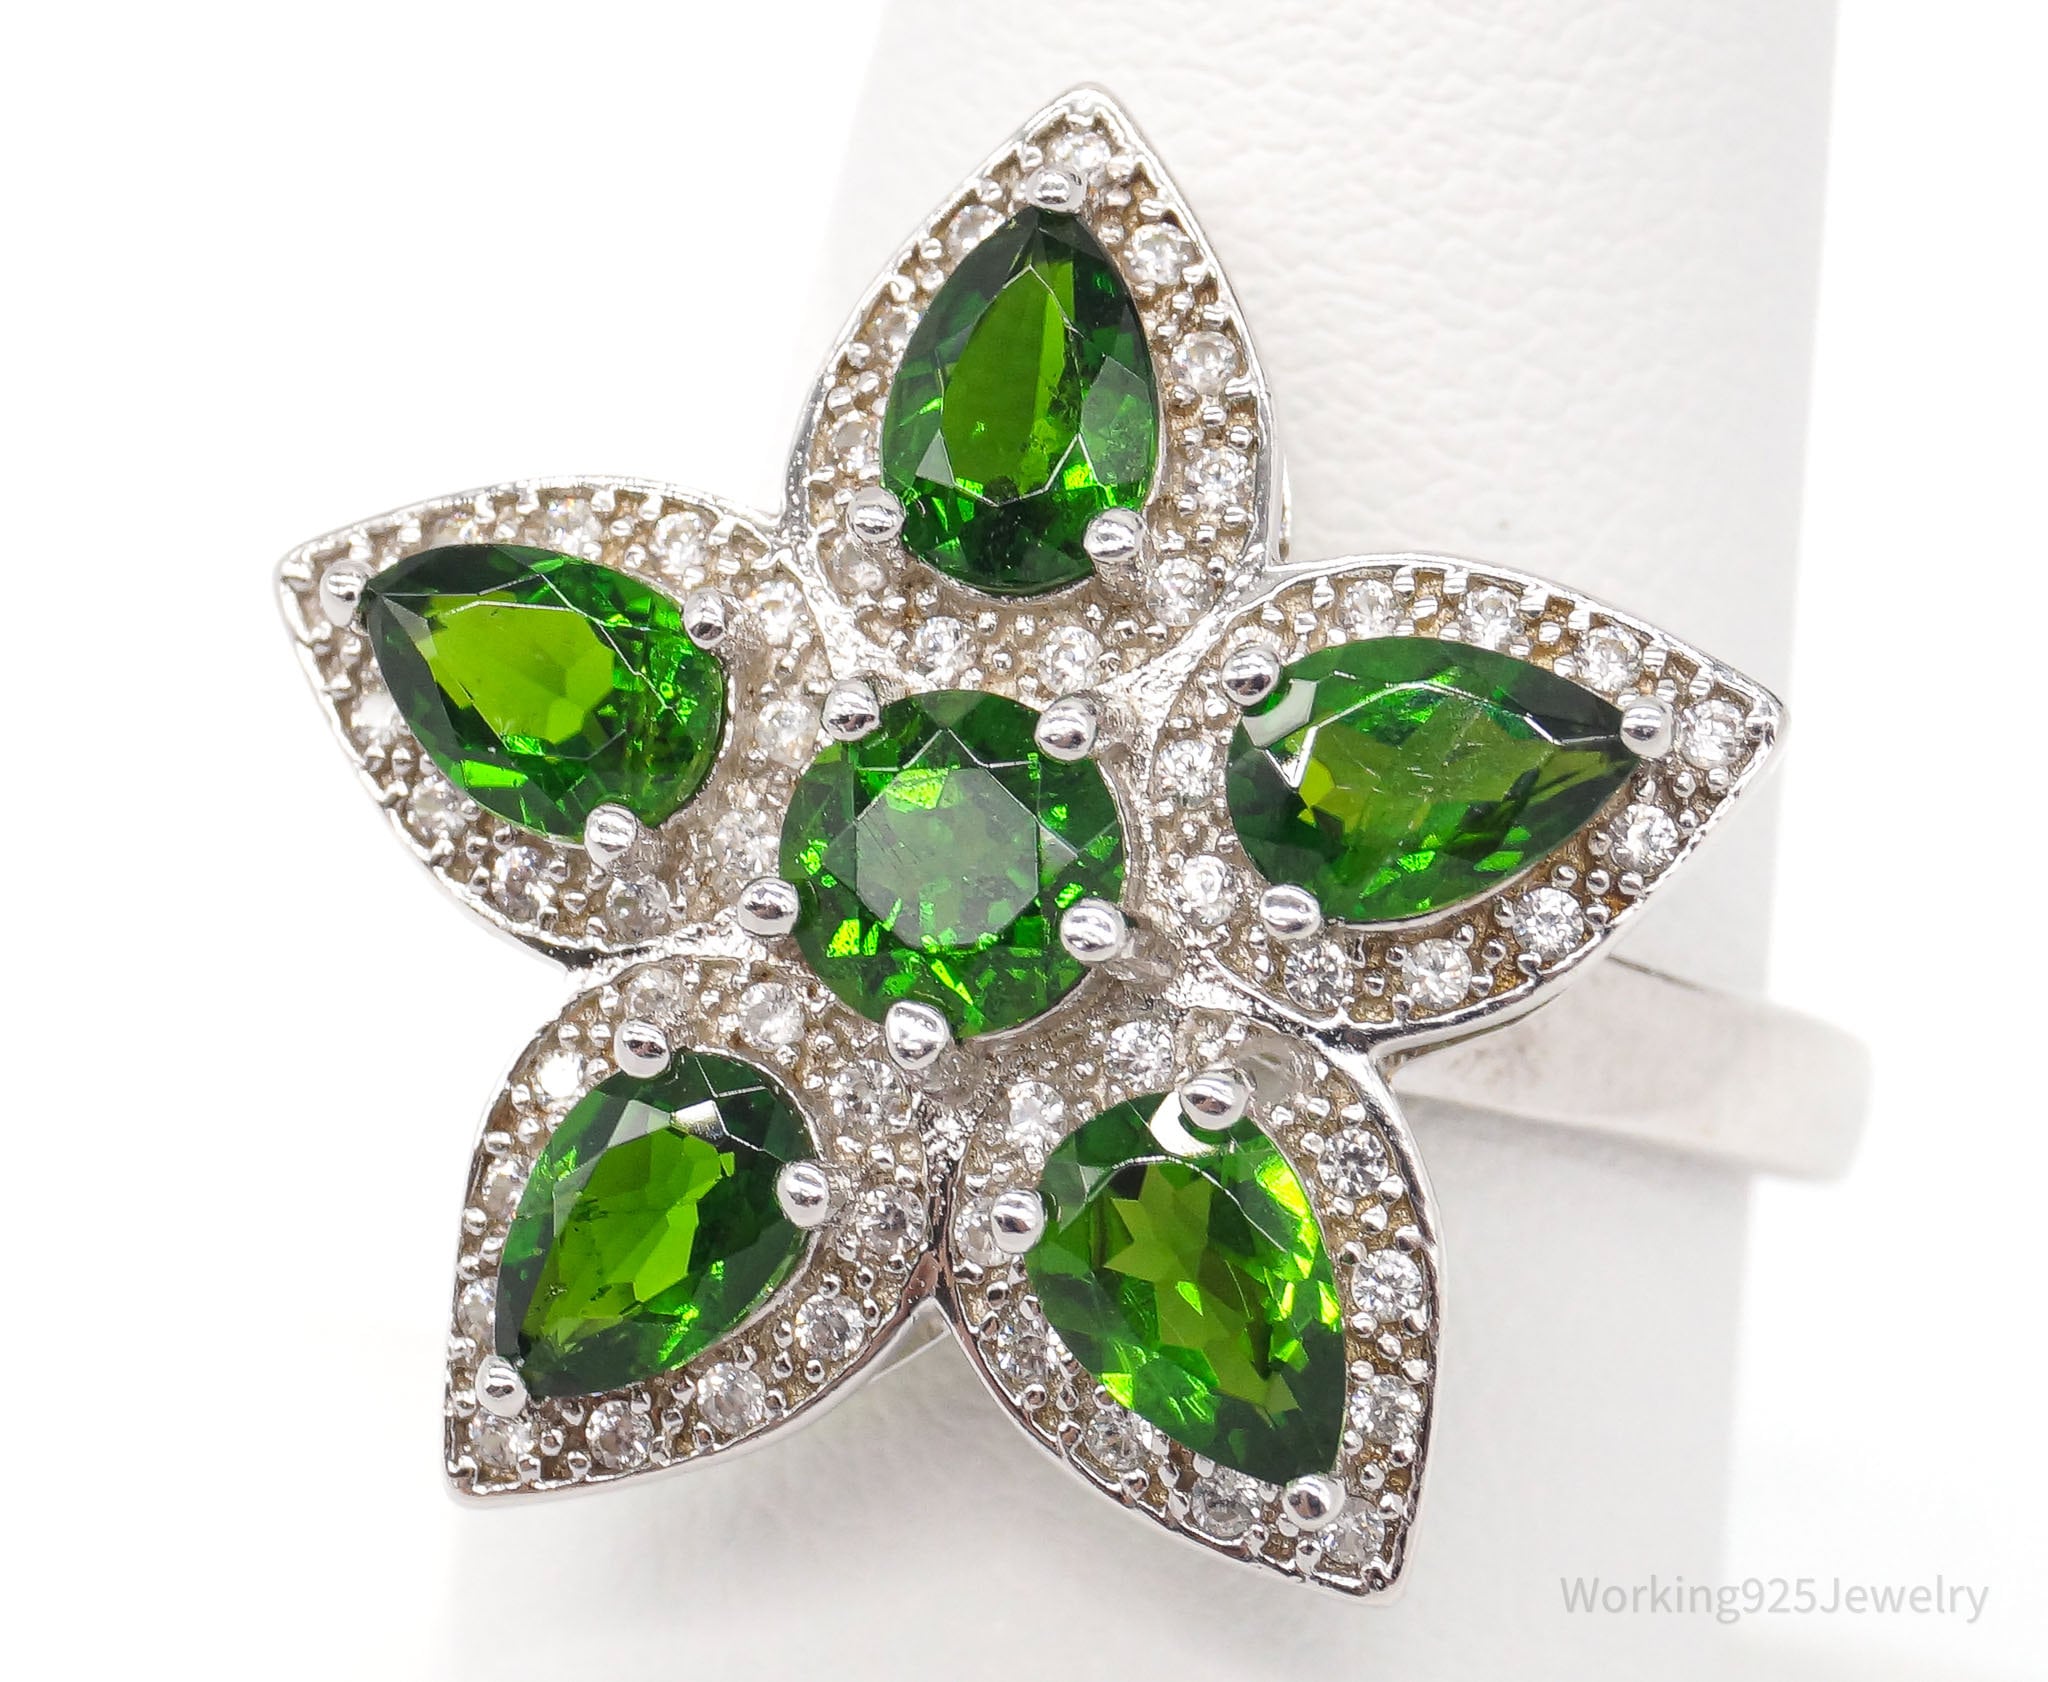 Vintage lab Emerald Cubic Zirconia Flower Sterling Silver Ring - Size 8.25